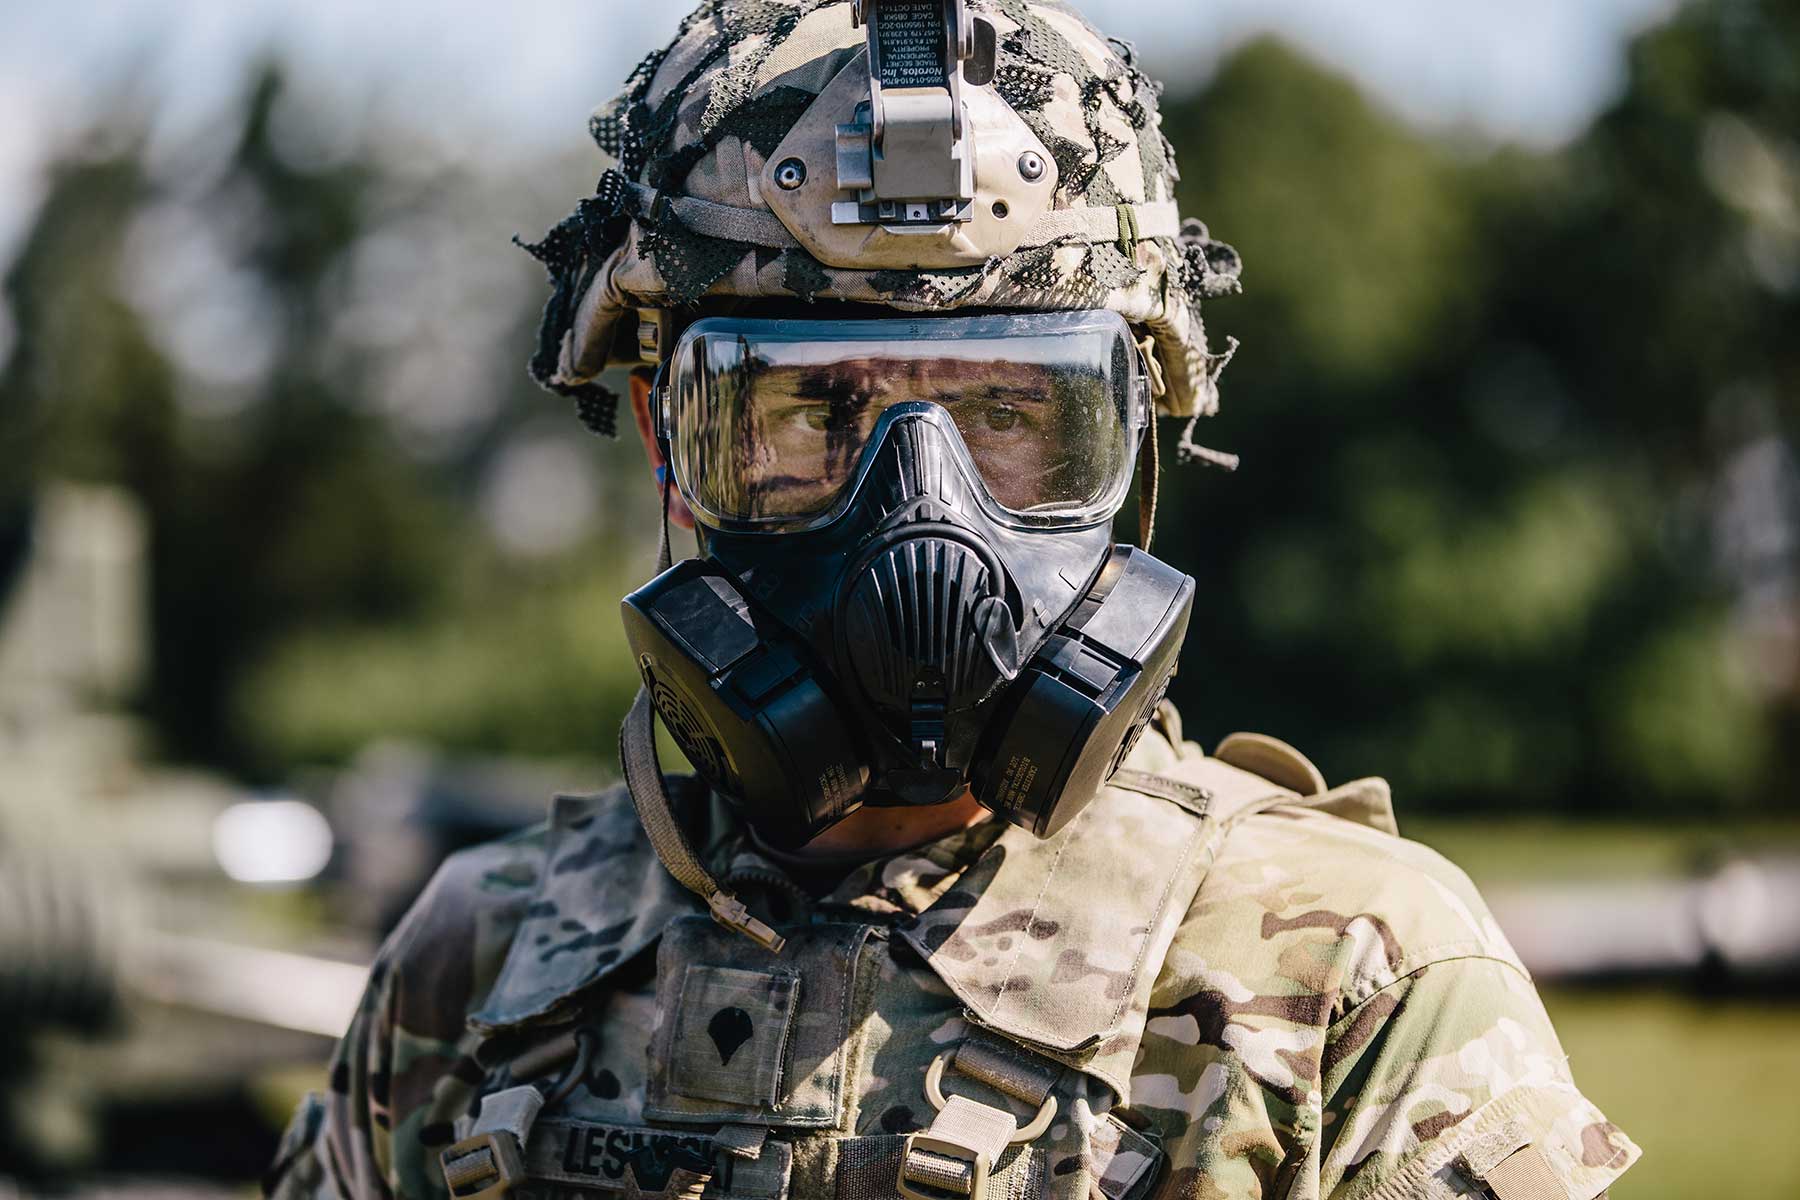 A U.S. Army paratrooper dons MOPP gear after the call of "gas, gas, gas."